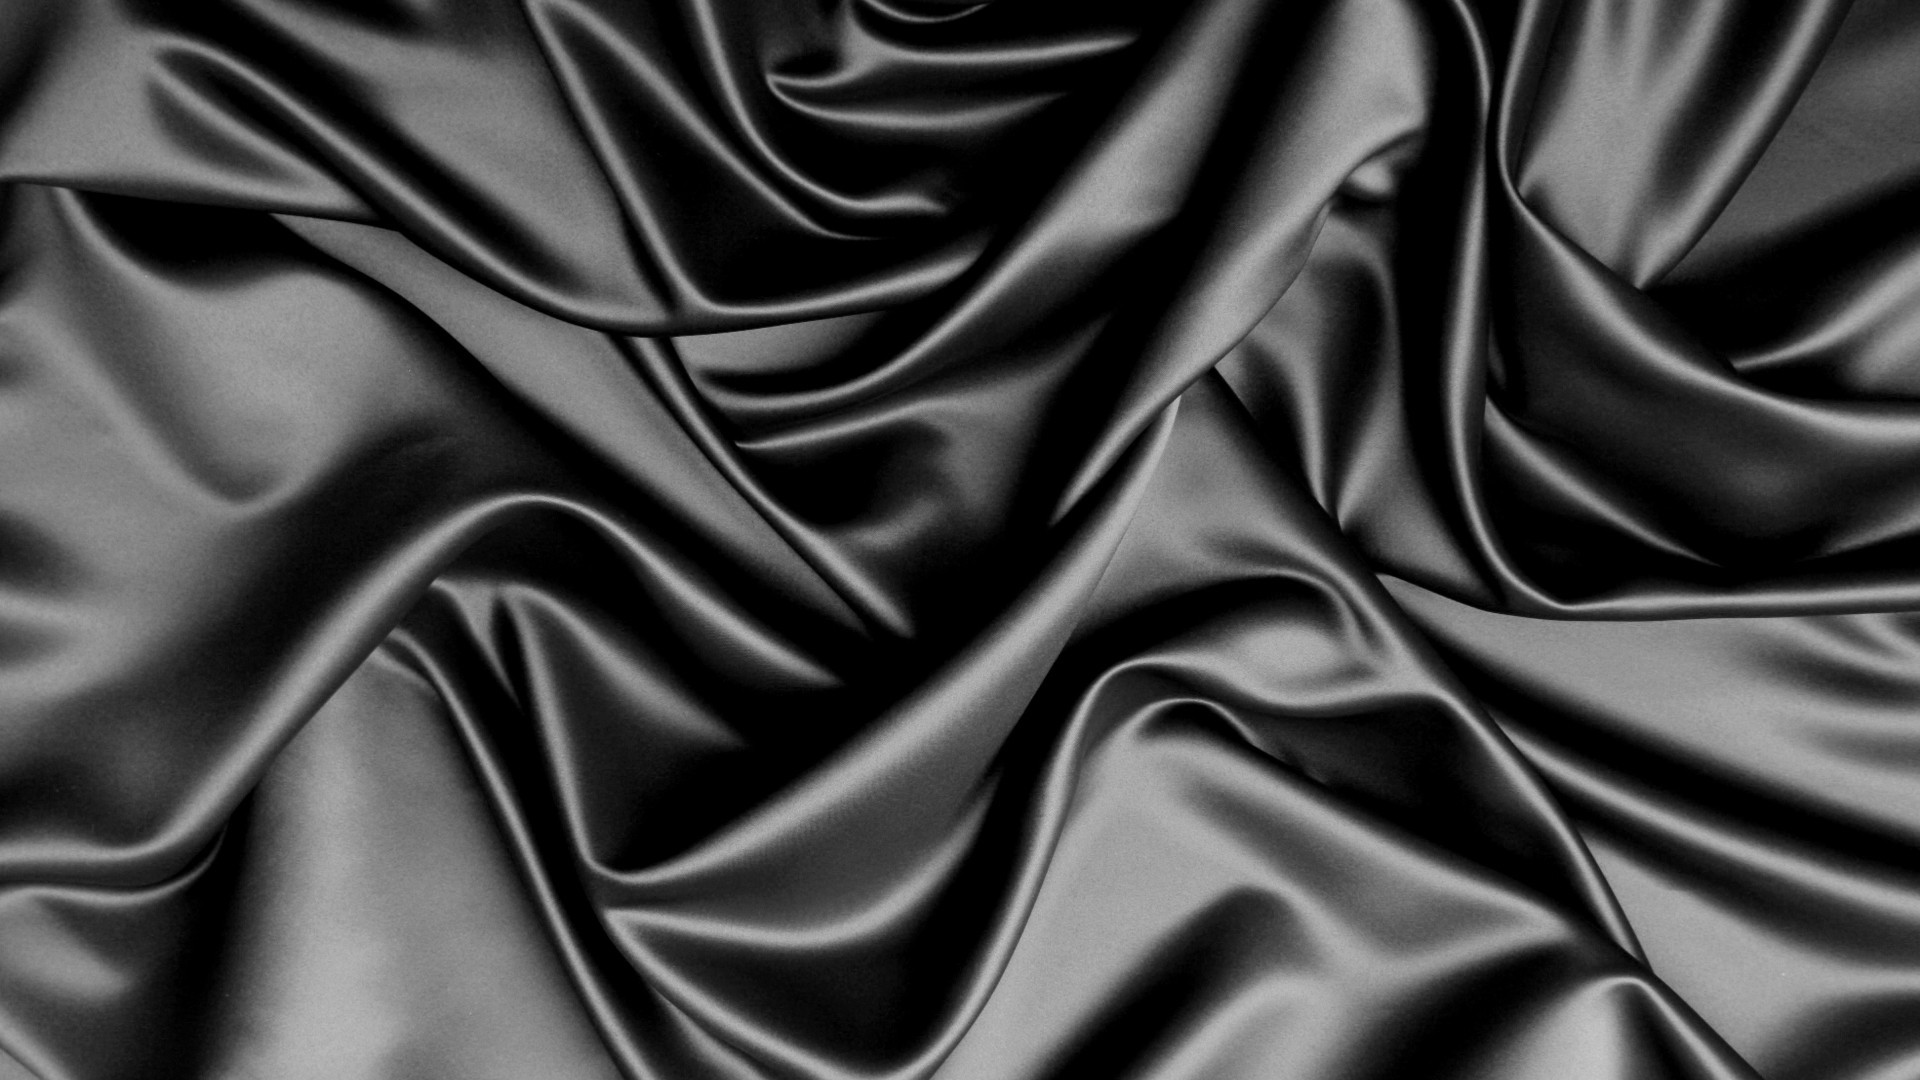 Android Wallpaper HD Black Silk with high-resolution 1920x1080 pixel. You can use this wallpaper for your Android backgrounds, Tablet, Samsung Screensavers, Mobile Phone Lock Screen and another Smartphones device